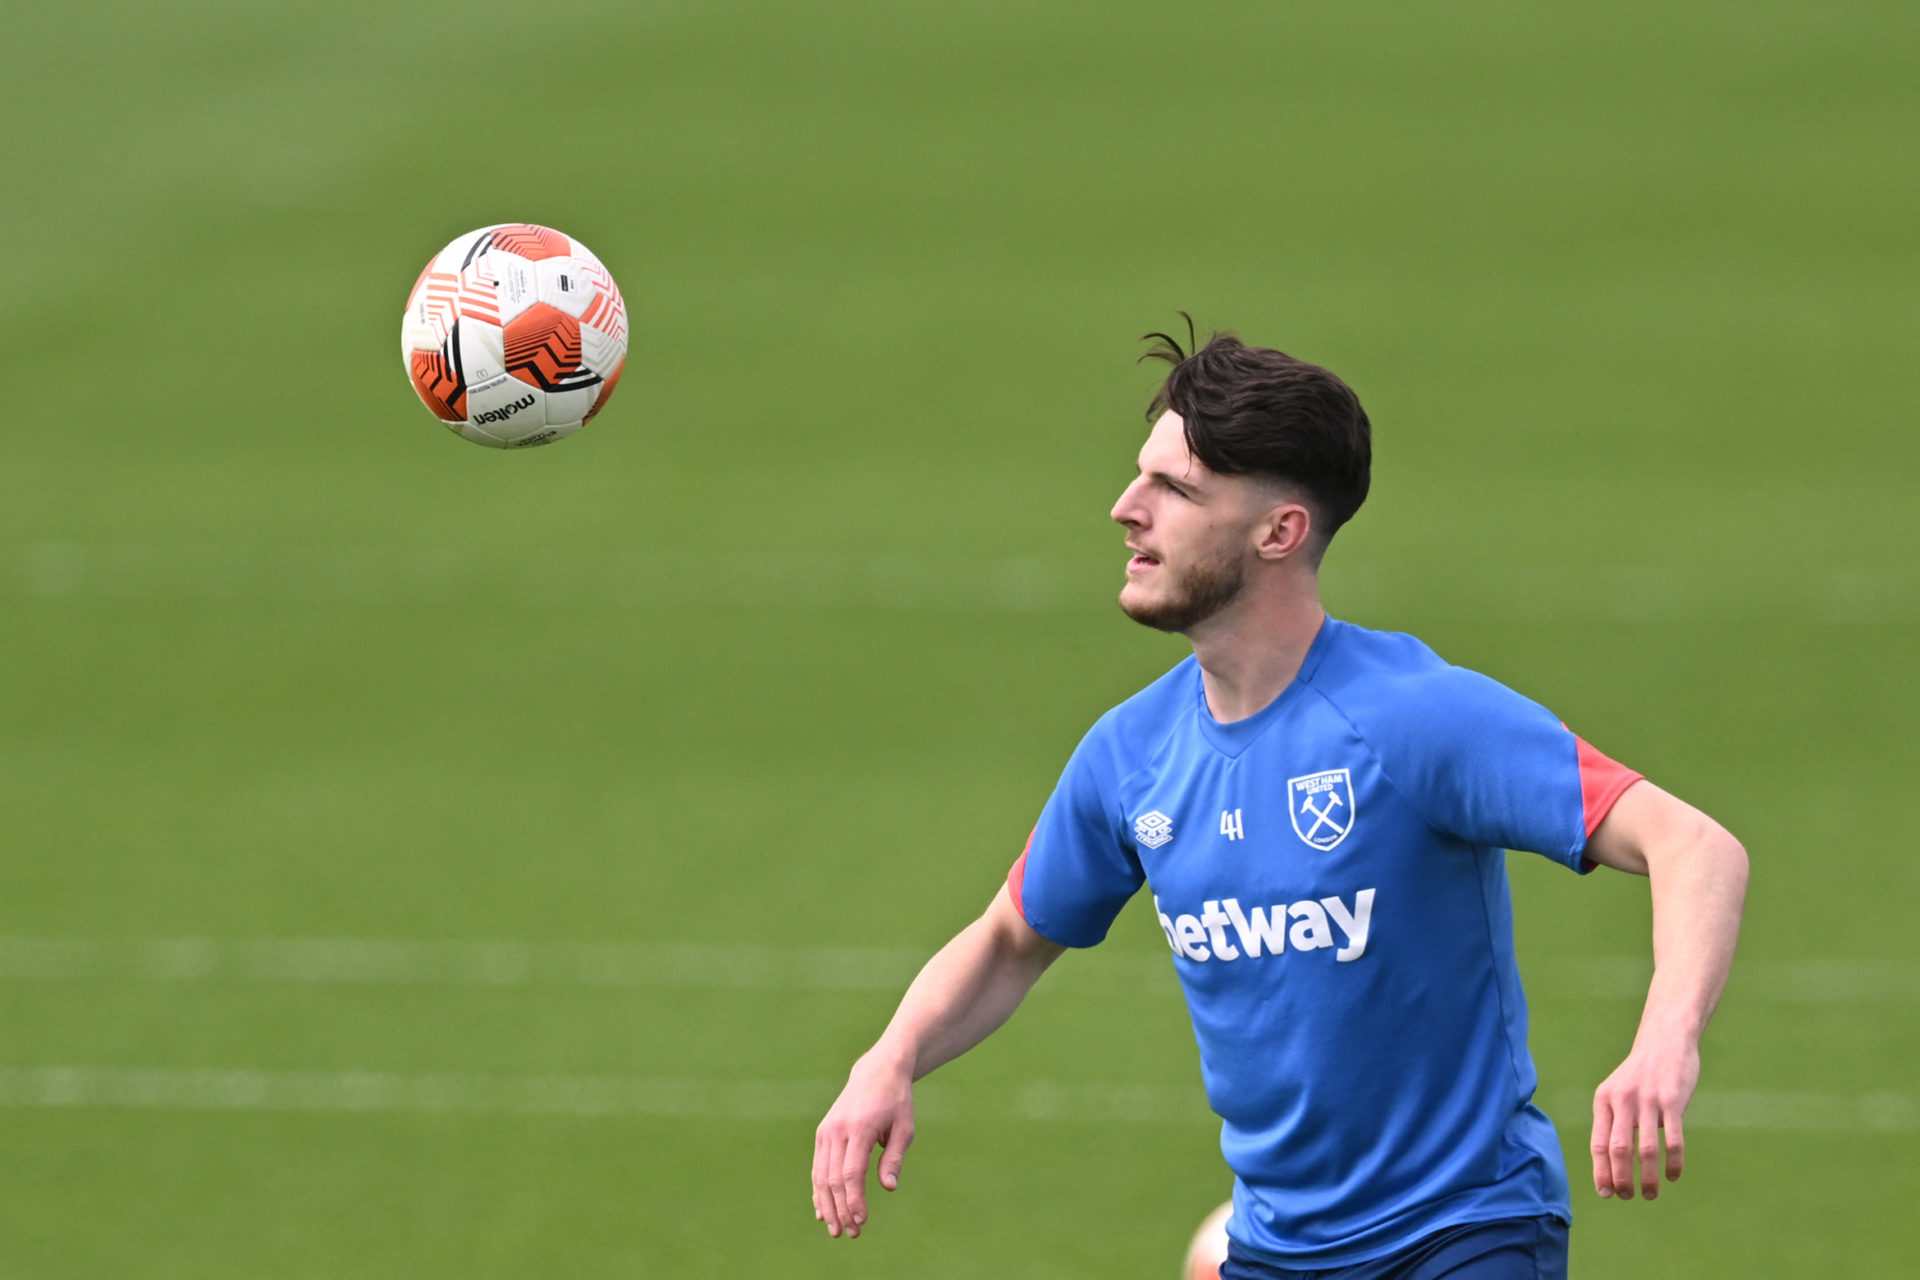 West Ham boss David Moyes is extremely demanding of Declan Rice